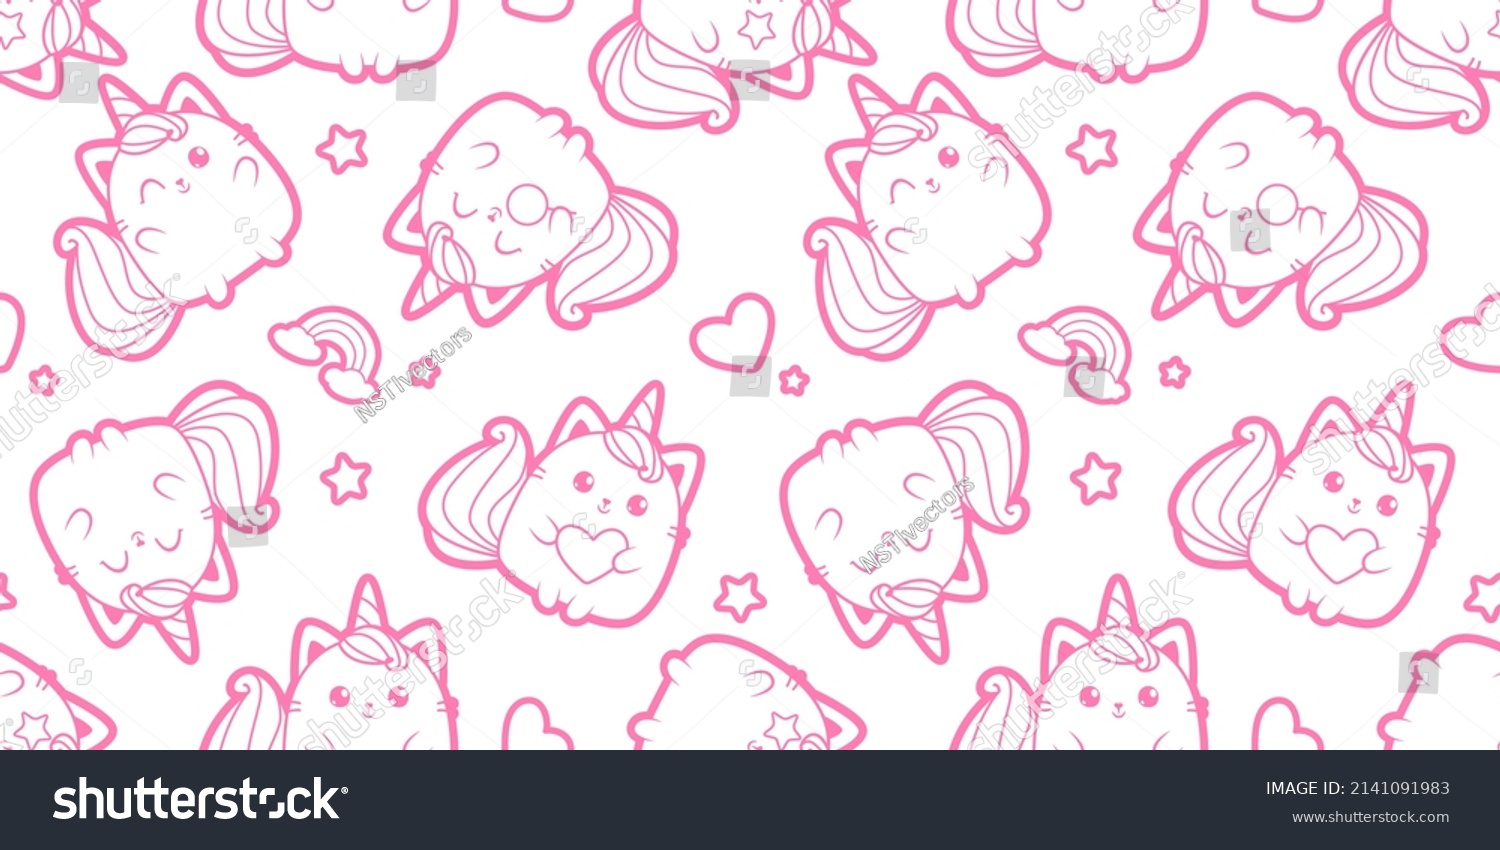 SVG of Cute Baby Cat Caticorn pattern. White Kitten Unicorn - pink vector seamless pattern. Kawaii Cat Unicorn with lollipop. Isolated vector illustration for kids design prints, posters, t-shirts, stickers svg